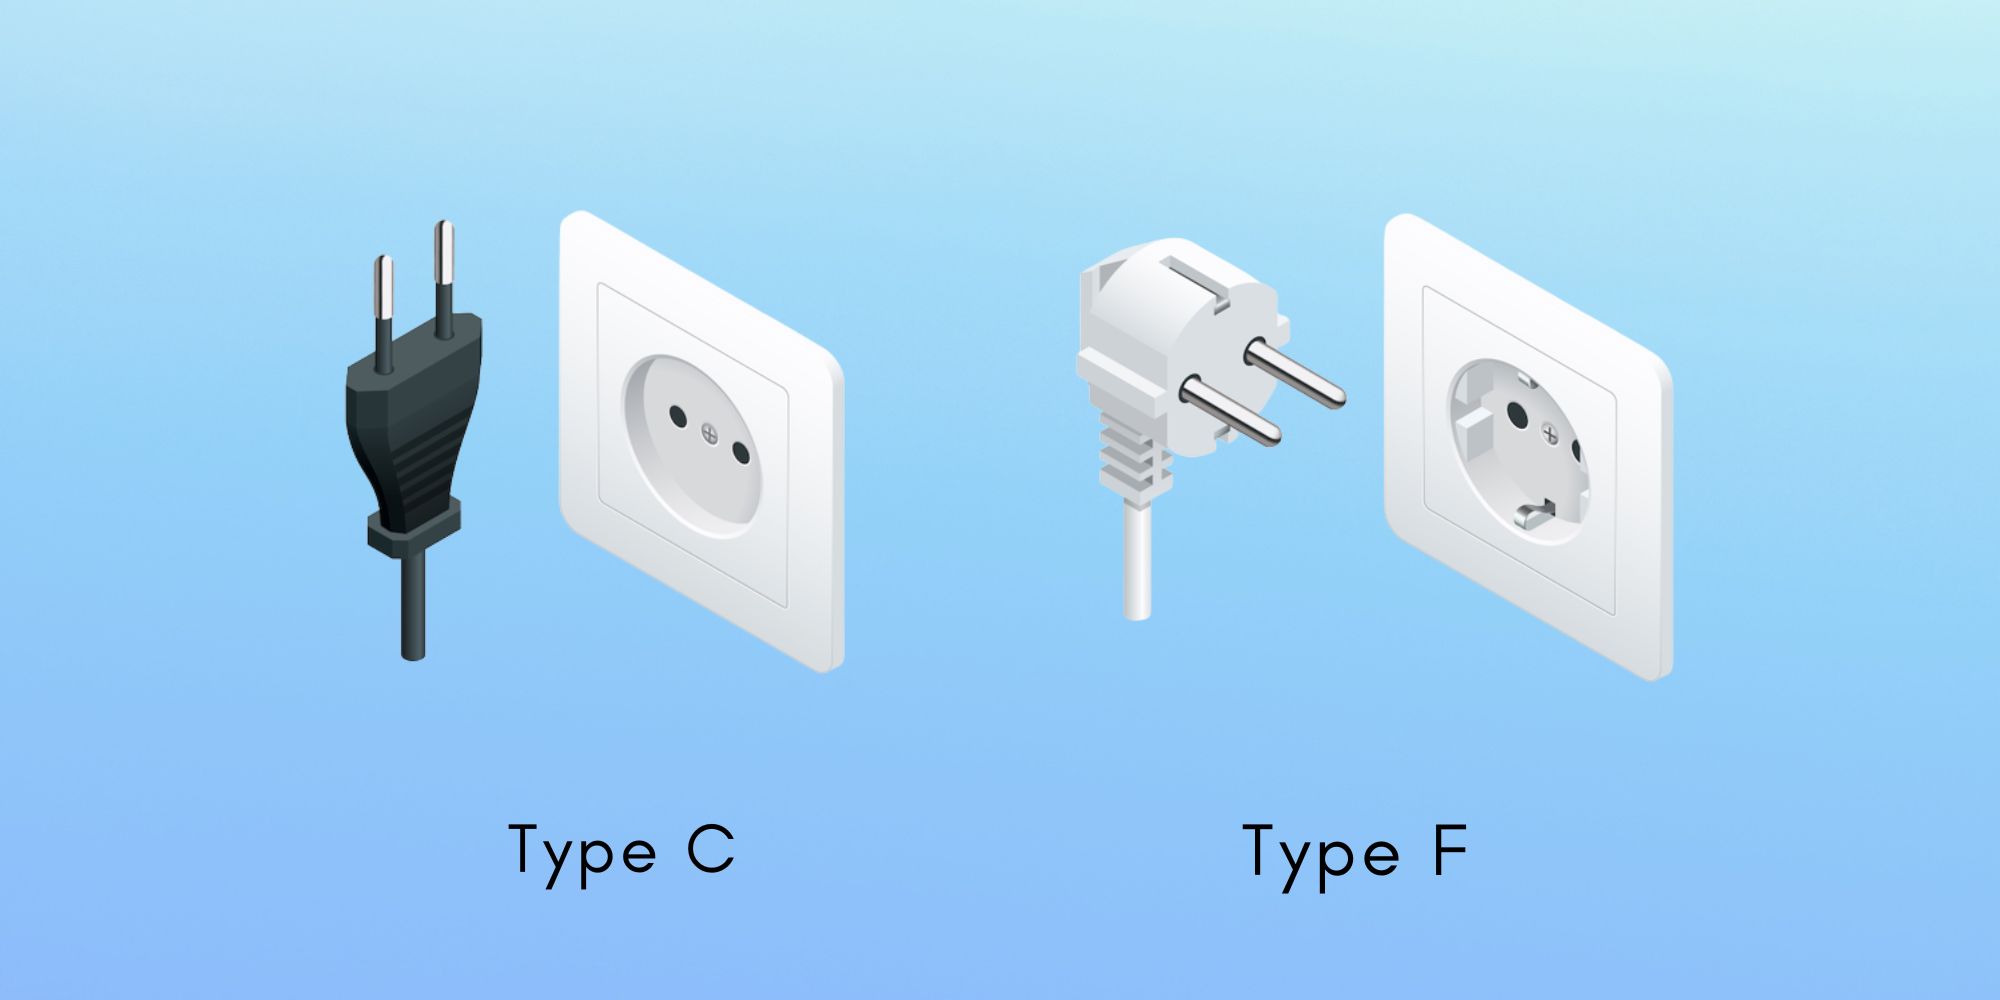 Europe Power Plugs and Sockets: Type C and Type F
